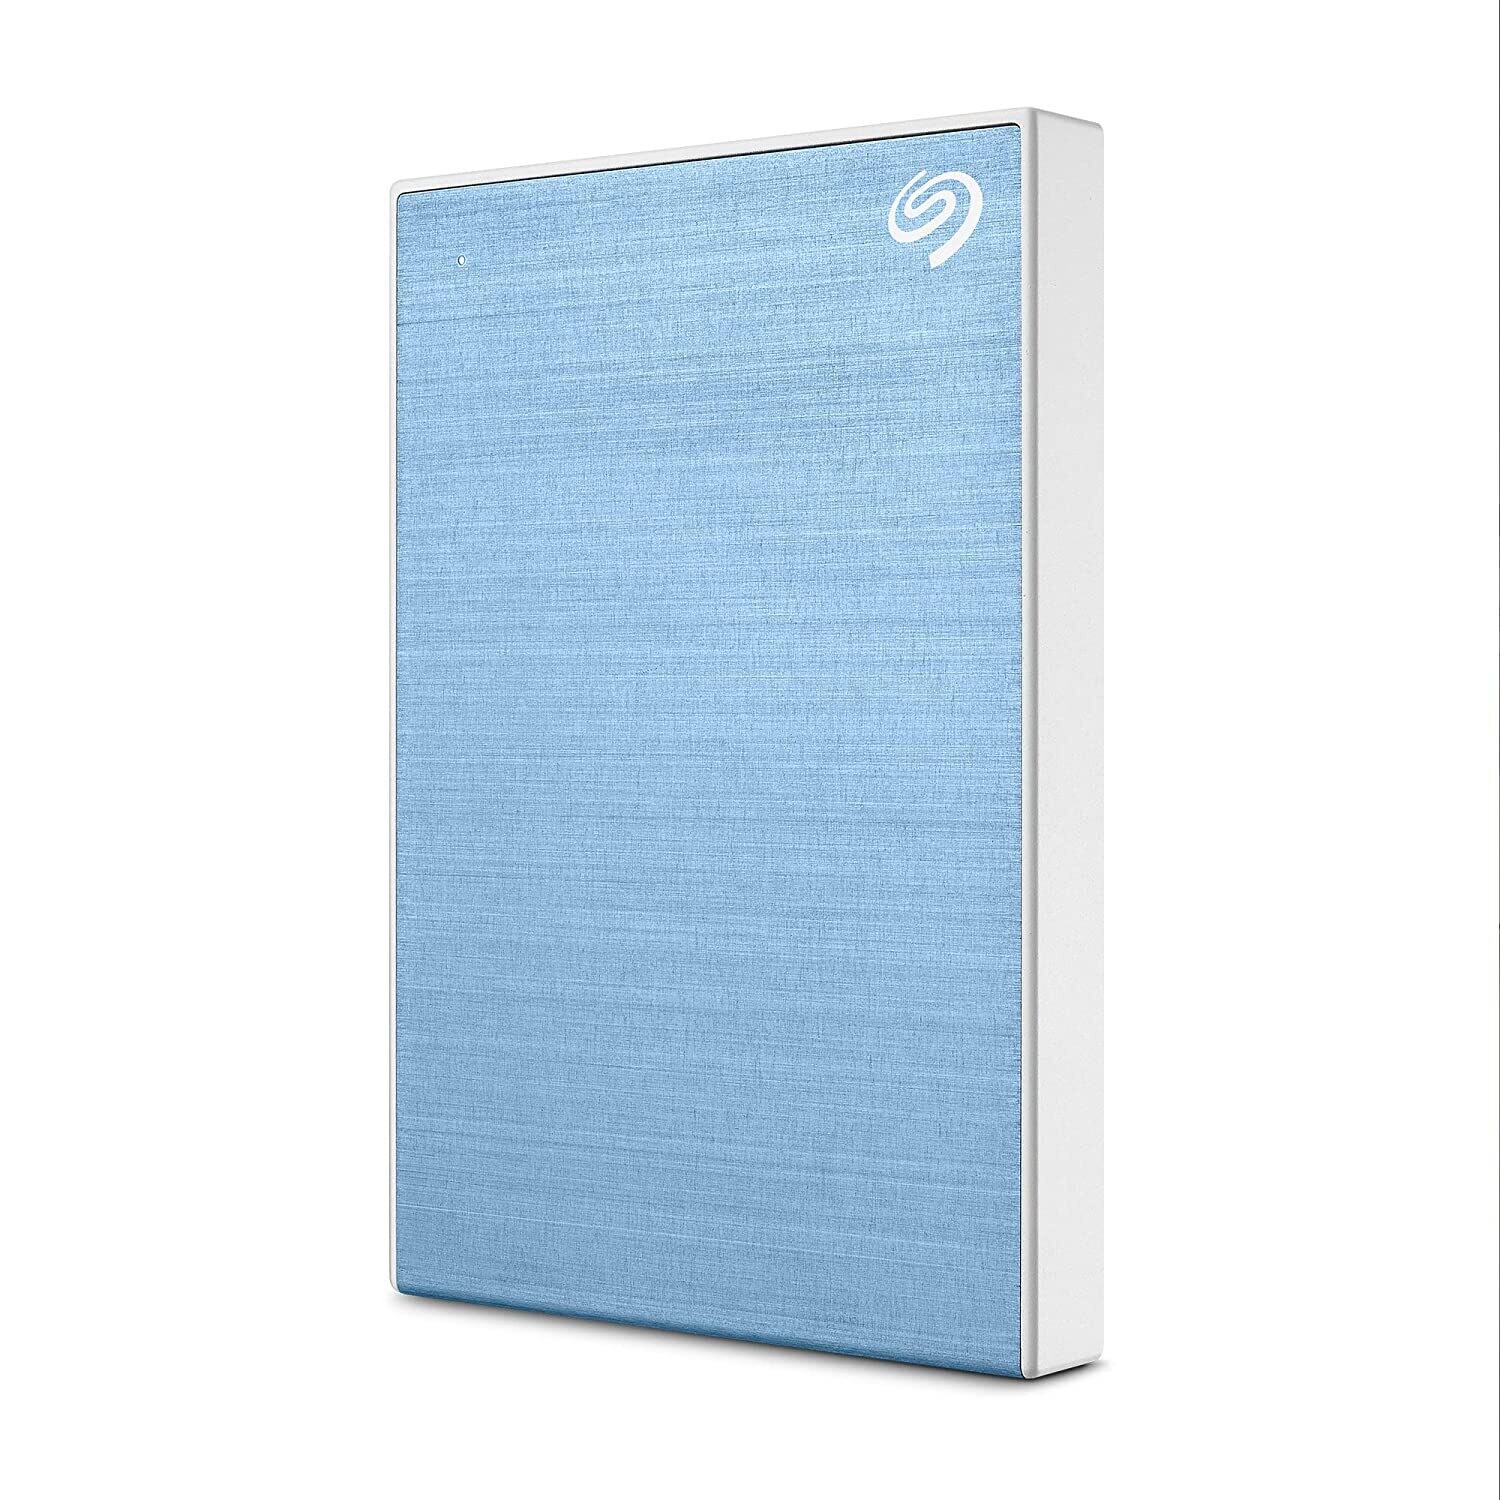 Seagate One Touch 4TB External HDD with Password Protection – Light Blue